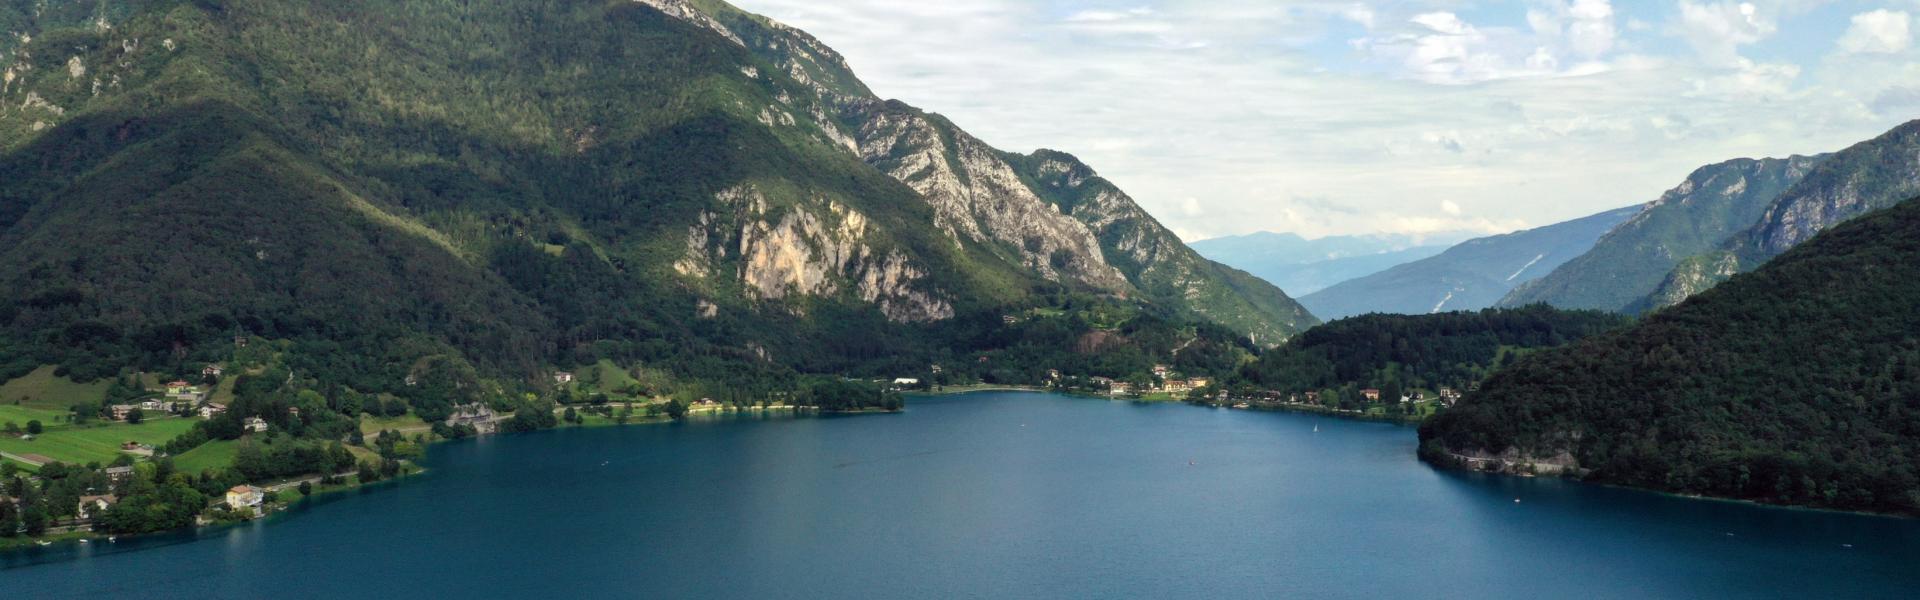 Find the ideal holiday home by Lake Ledro for your Italian adventure - Casamundo